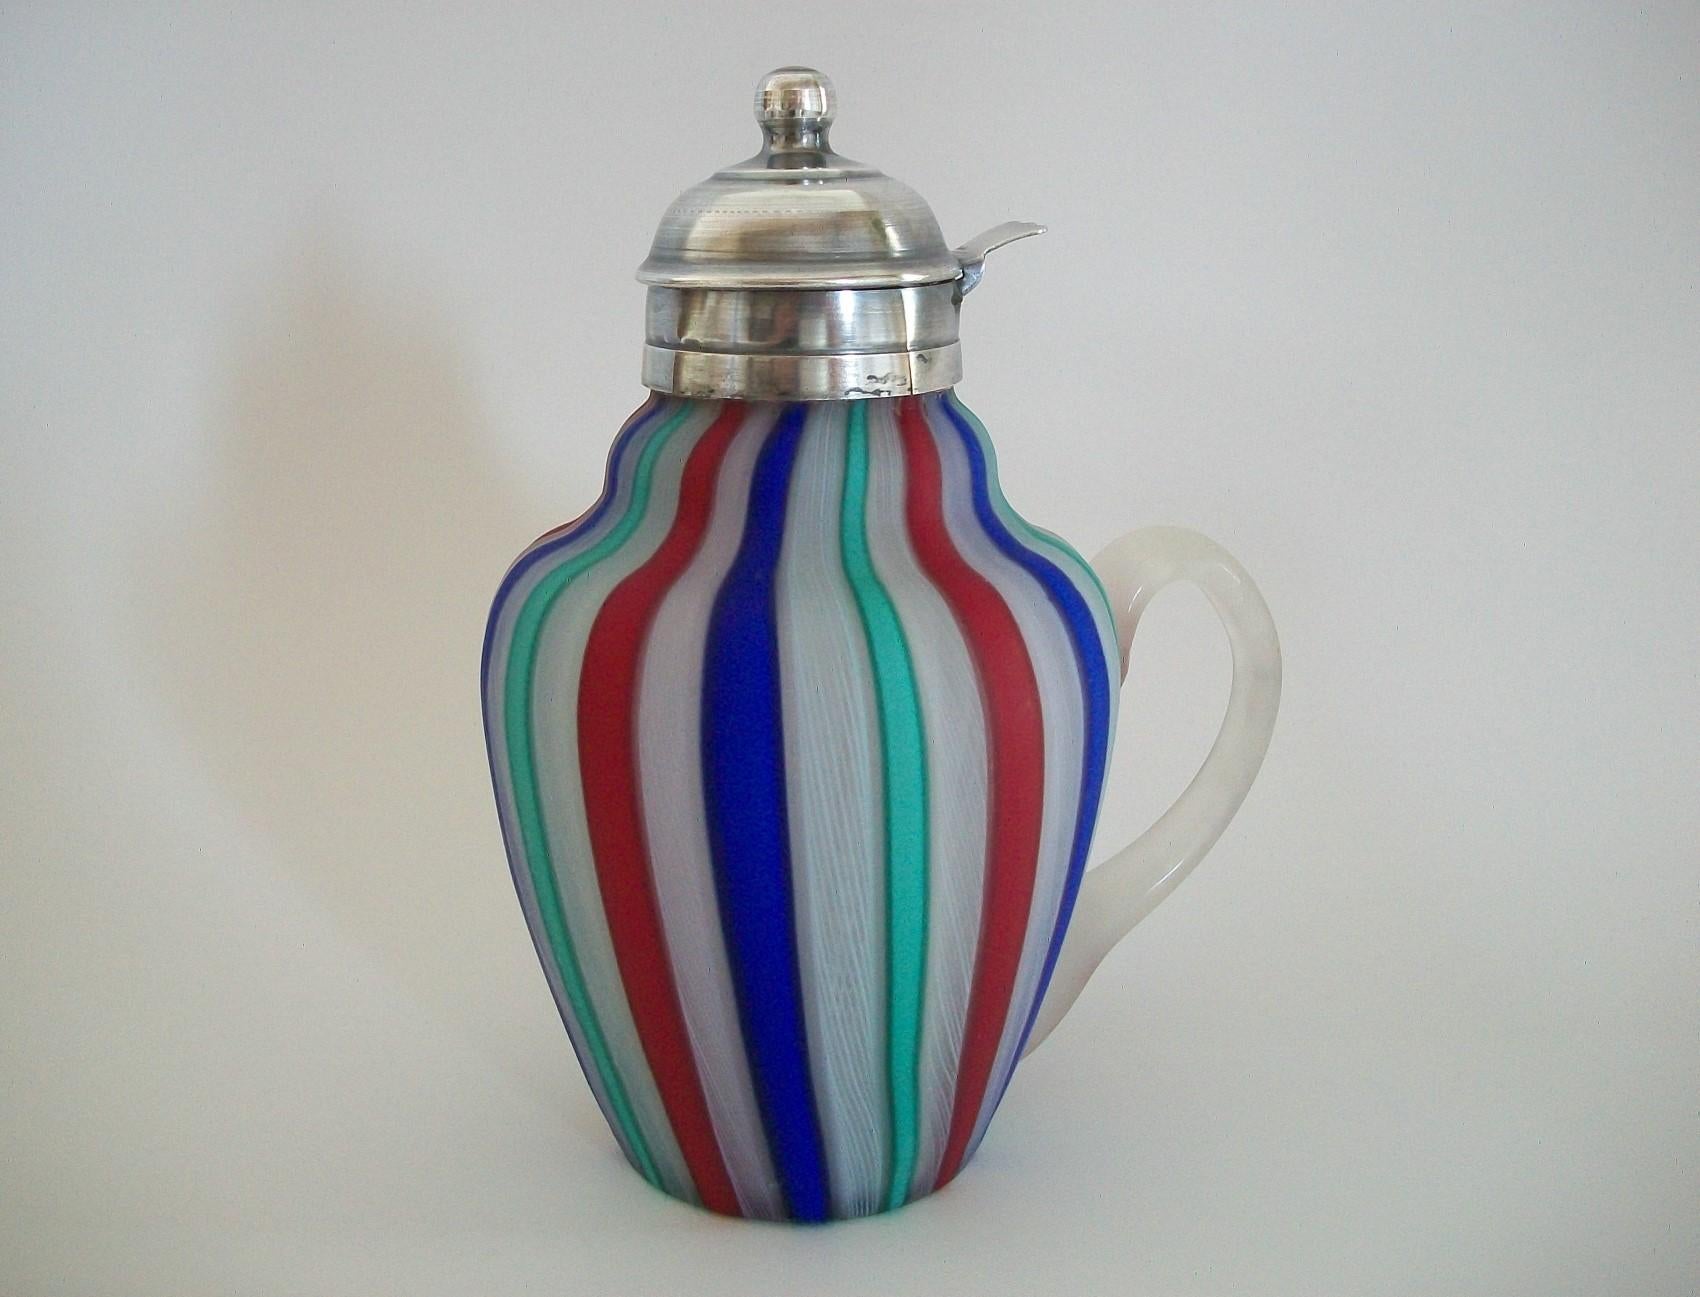 Silver Plate Fratelli Toso, Murano Latticino Glass Syrup Jug, Italy, Early 20th Century For Sale